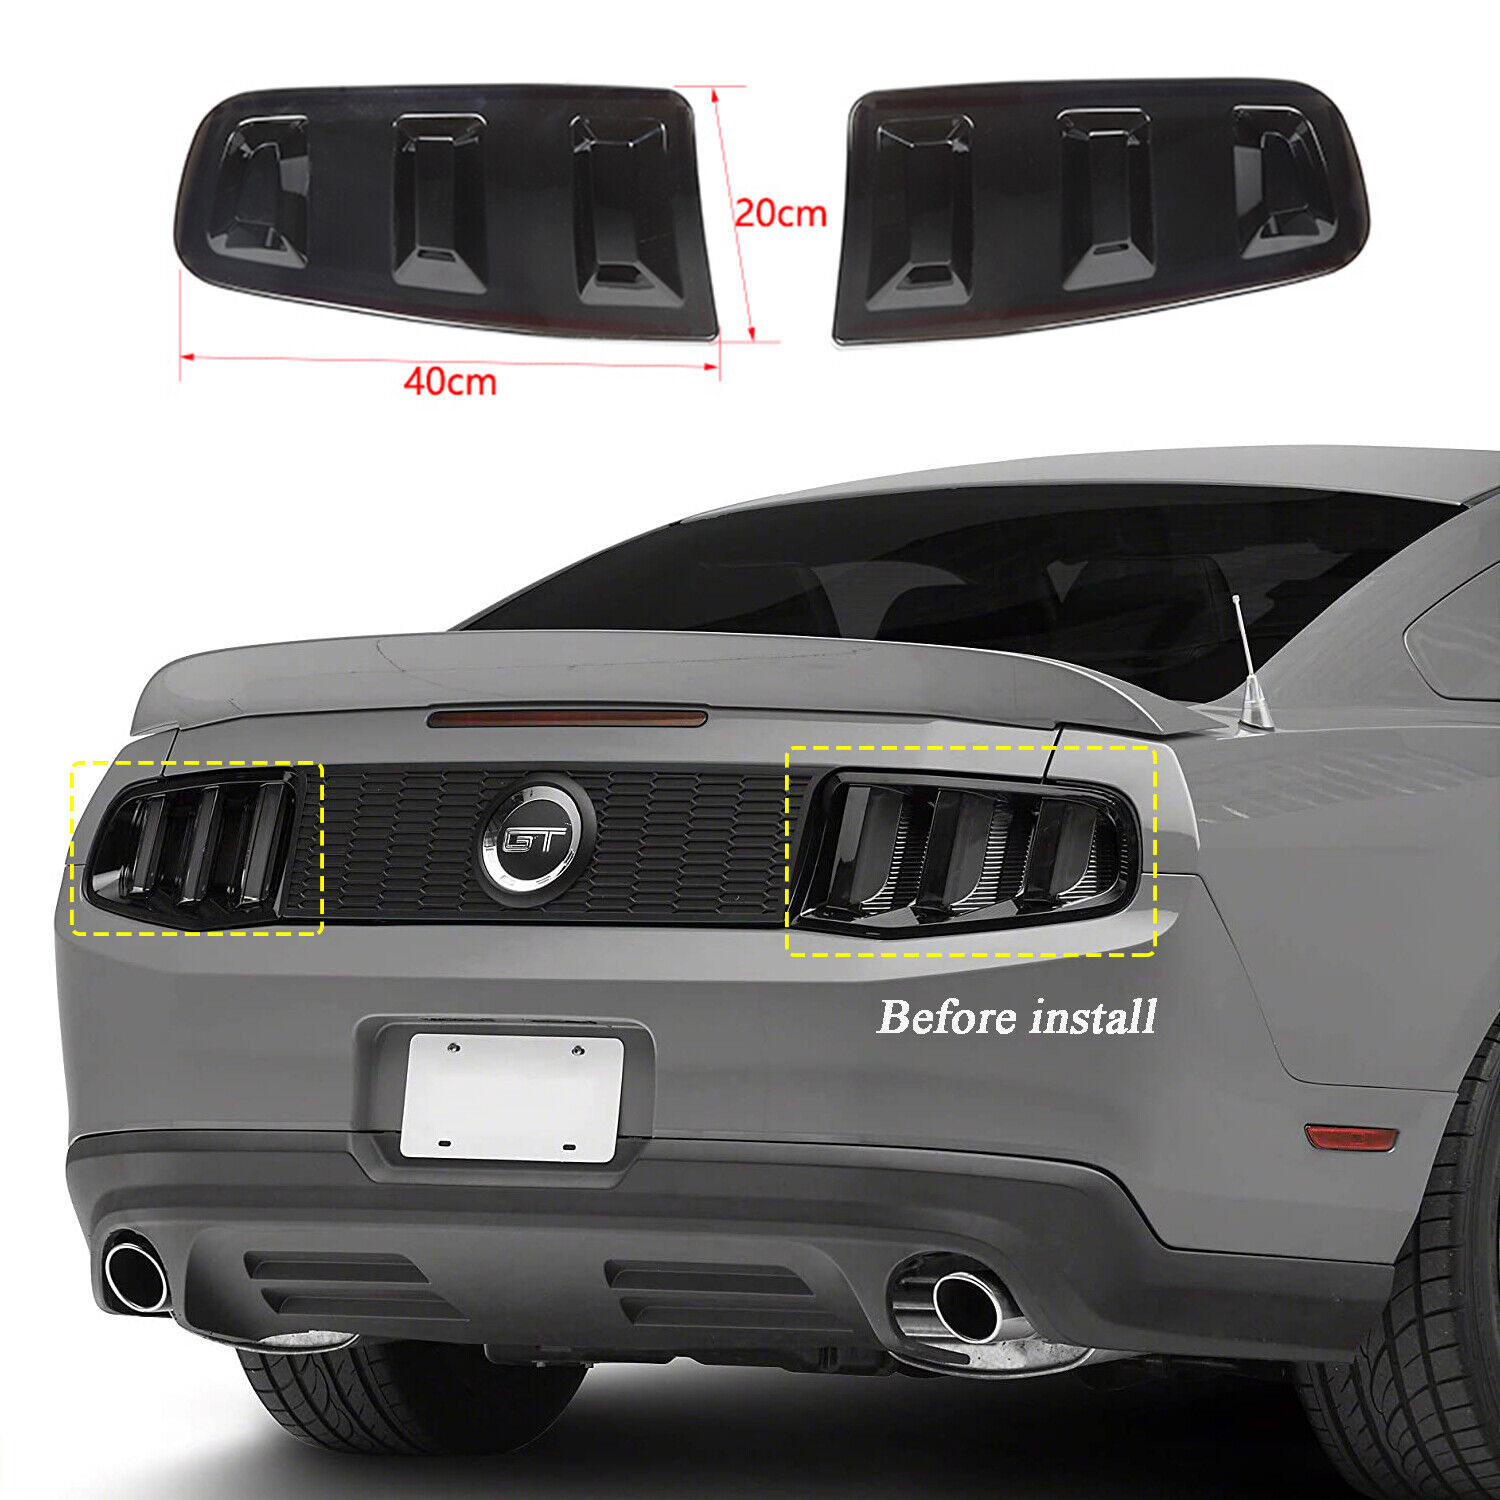 Smoked Black Tail Light Covers Rear Light Guards for Ford Mustang 2013 2014